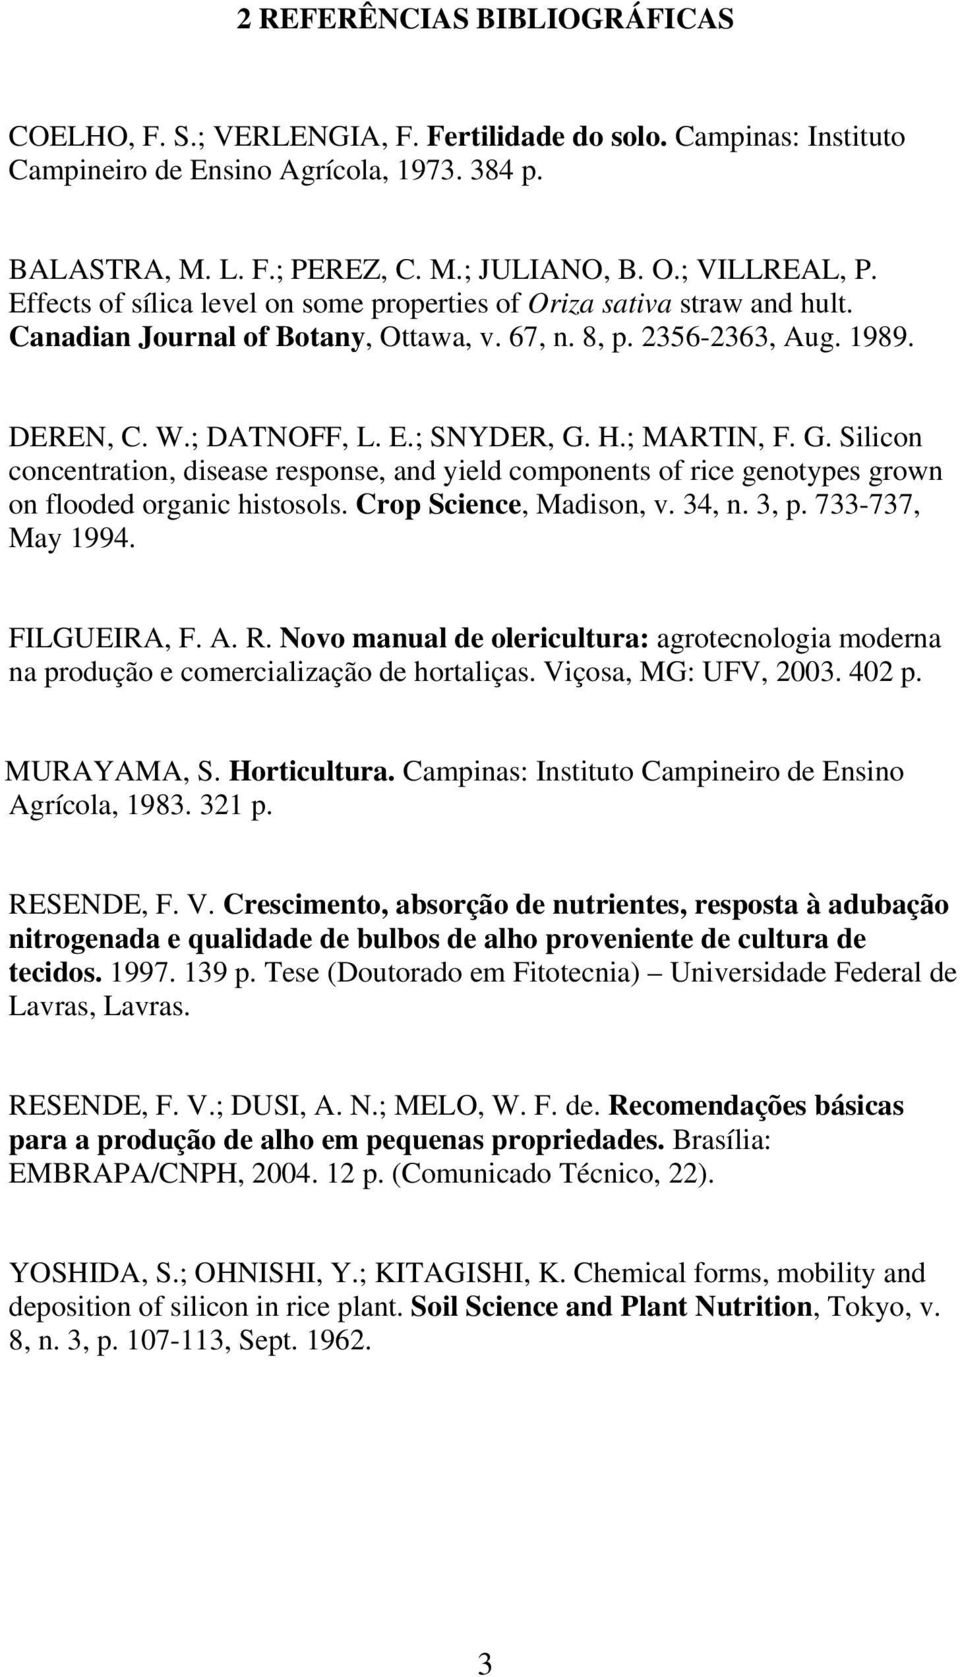 H.; MARTIN, F. G. Silicon concentration, disease response, and yield components of rice genotypes grown on flooded organic histosols. Crop Science, Madison, v. 34, n. 3, p. 733-737, May 1994.